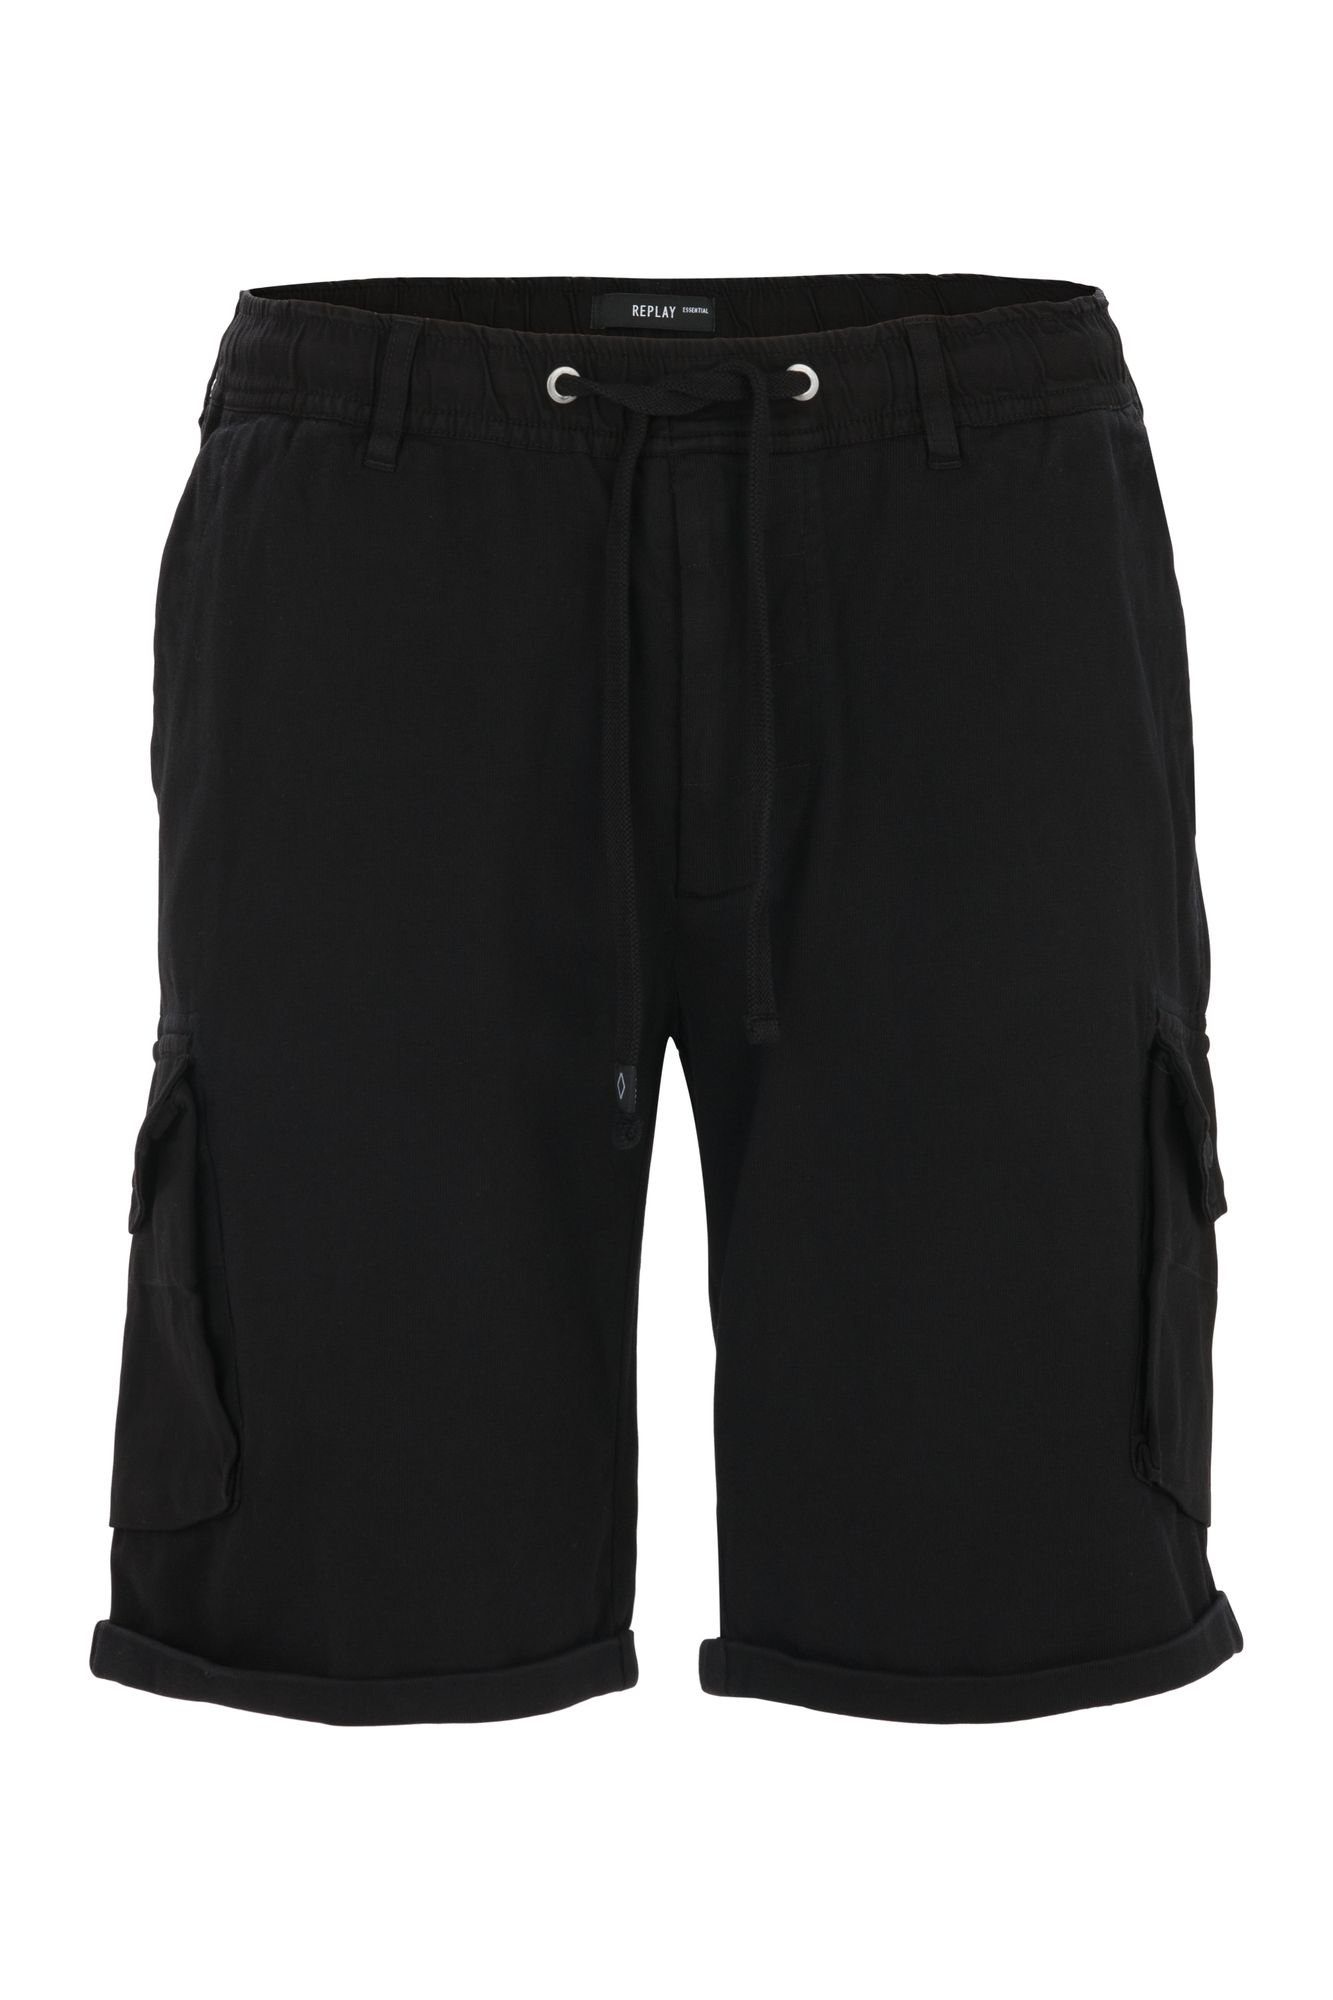 JERSEY HEAVY DYED Cargoshorts Replay COTTON GARMENT